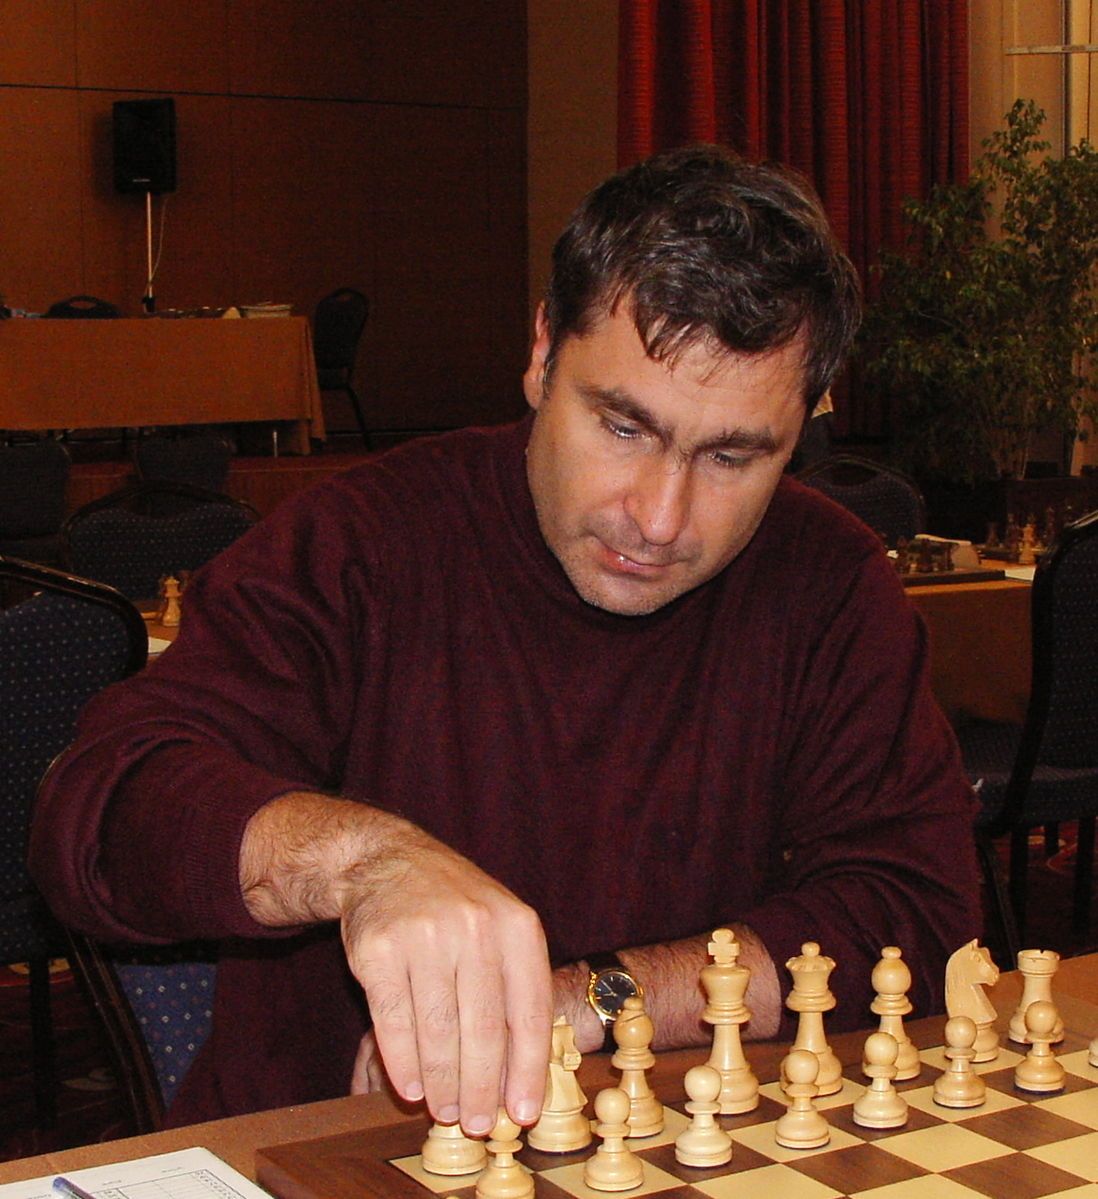 Did you know? Vasyl Ivanchuk is not the player's real name - it's a  nickname given to him after his brilliant move against Garry Chess :  r/AnarchyChess